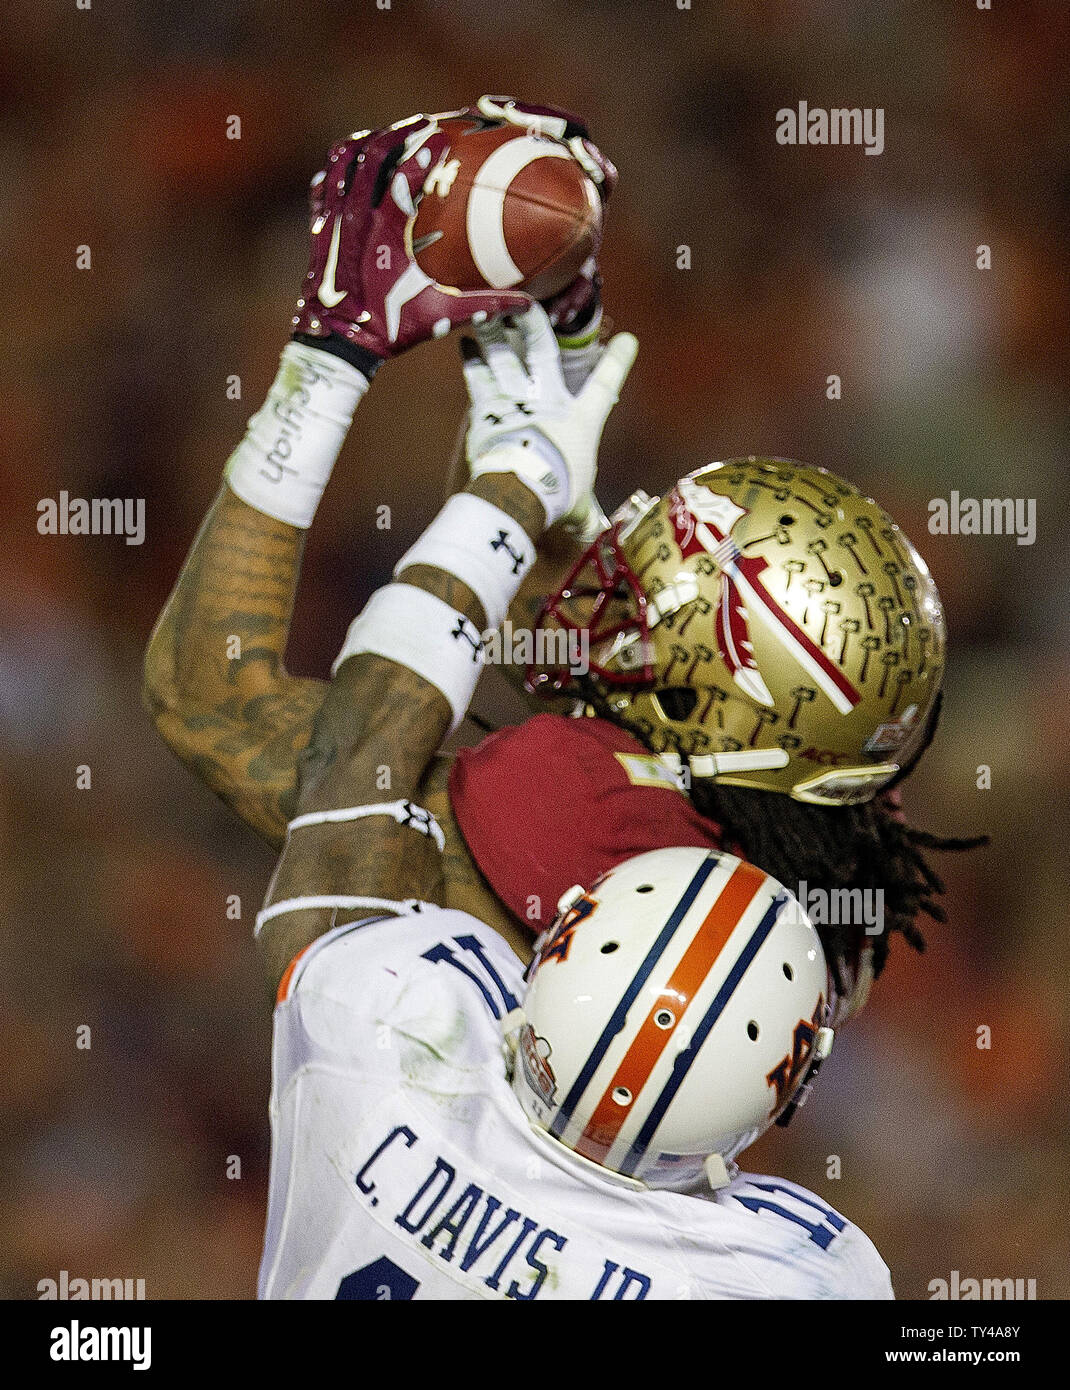 Florida State Seminoles receiver Kelvin Benjamin makes the game-winning touchdown catch over Auburn Tiger cornerback Chris Davis with 13 seconds left in the BCS national title college game at the Rose Bowl in Pasadena, California on January 6, 2014.   Heisman Trophy winner quarterback Jameis Winston threw the two-yard pass.   Florida State defeated Auburn by a score of 34-31.  (RECROP)  UPI/Mark Wallheiser Stock Photo